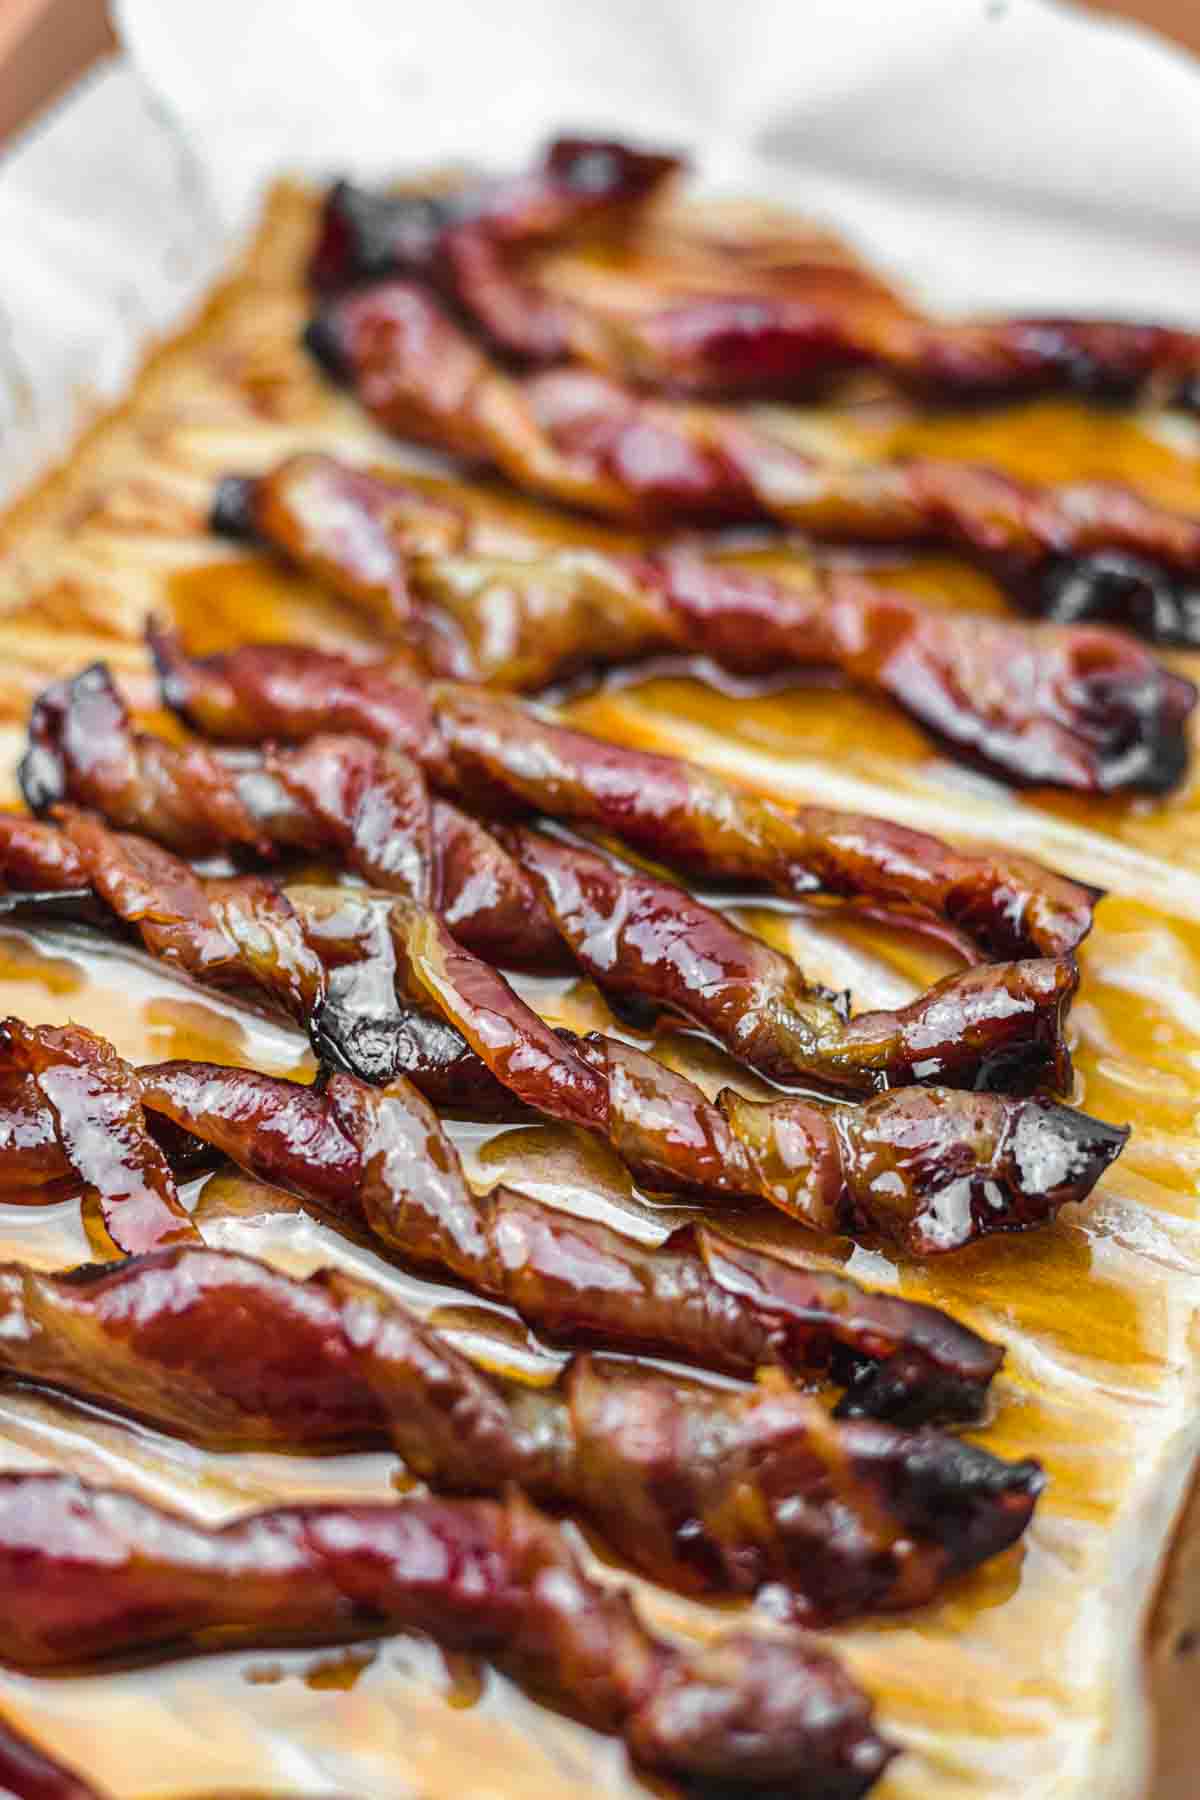 Candied bacon recipe on the baking sheet